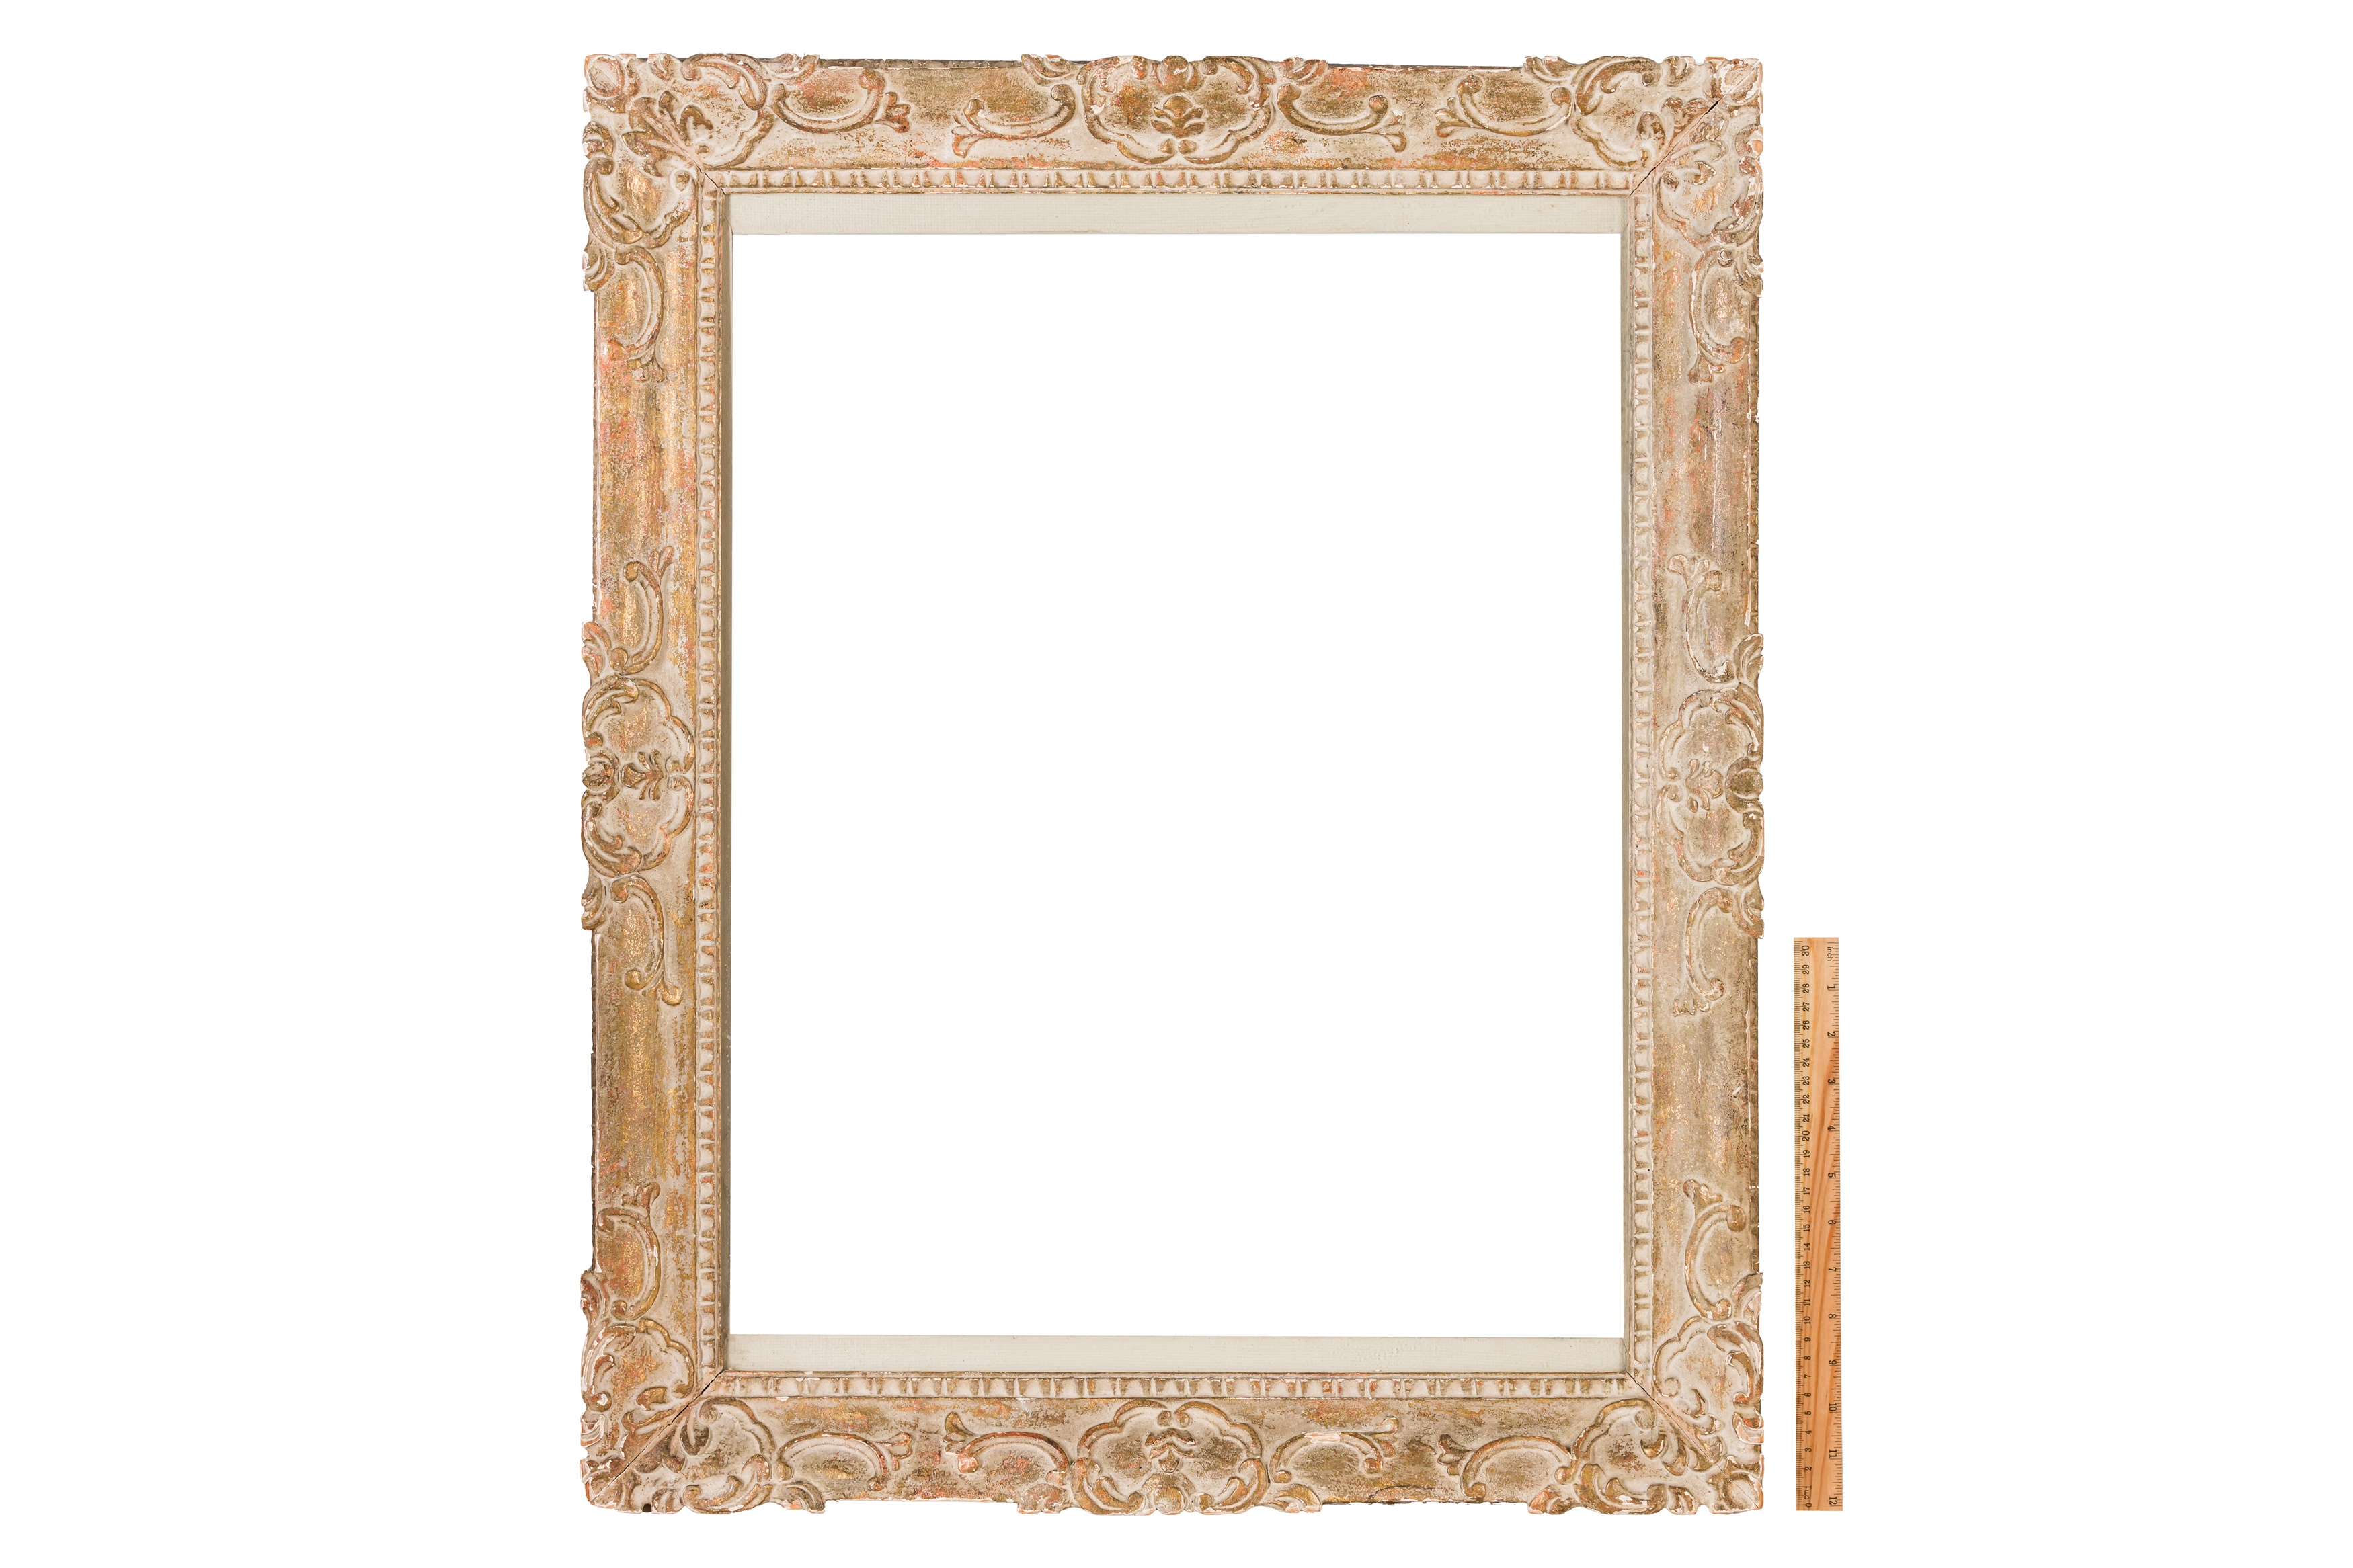 A LOUIS XIV STYLE CARVED AND GILDED FRAME With dentil sight, taenia, plain frieze, leaf cartouche - Image 4 of 4